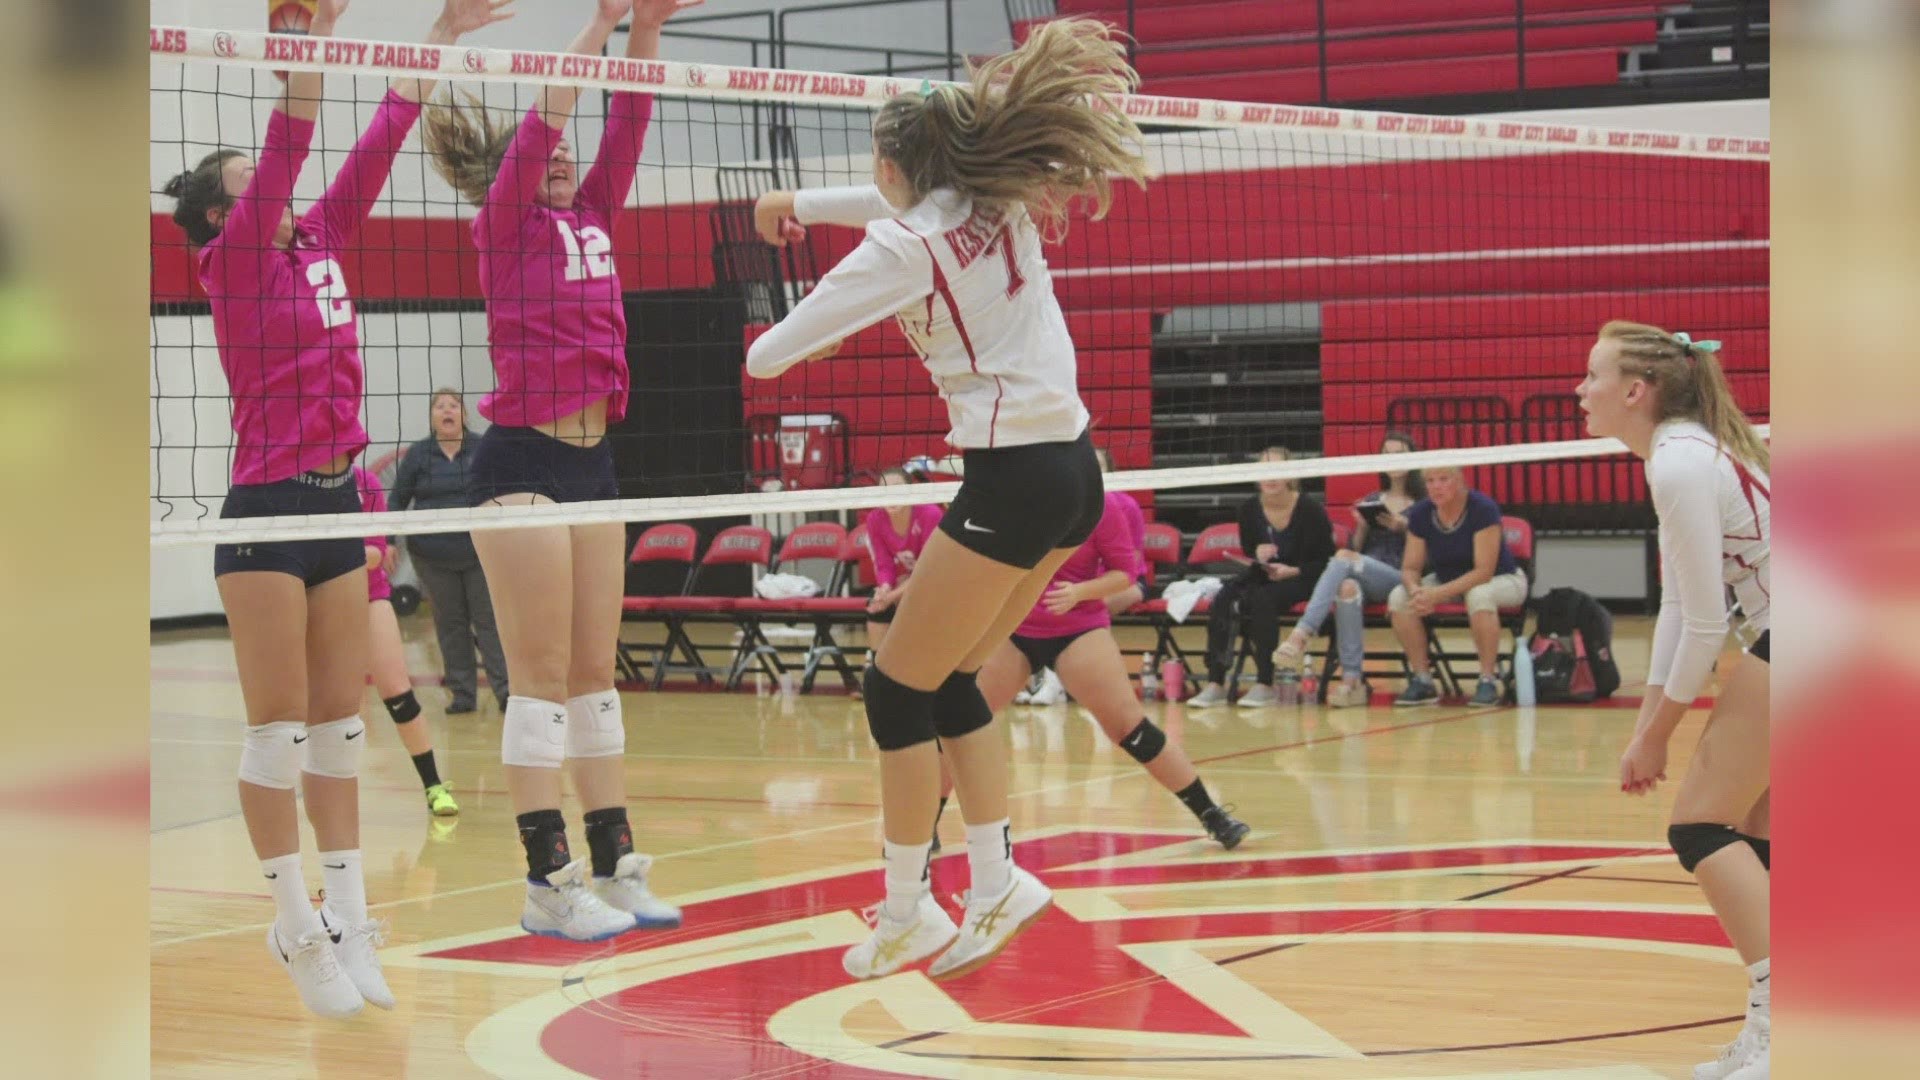 This week's MSA is a senior volleyball star at Kent City